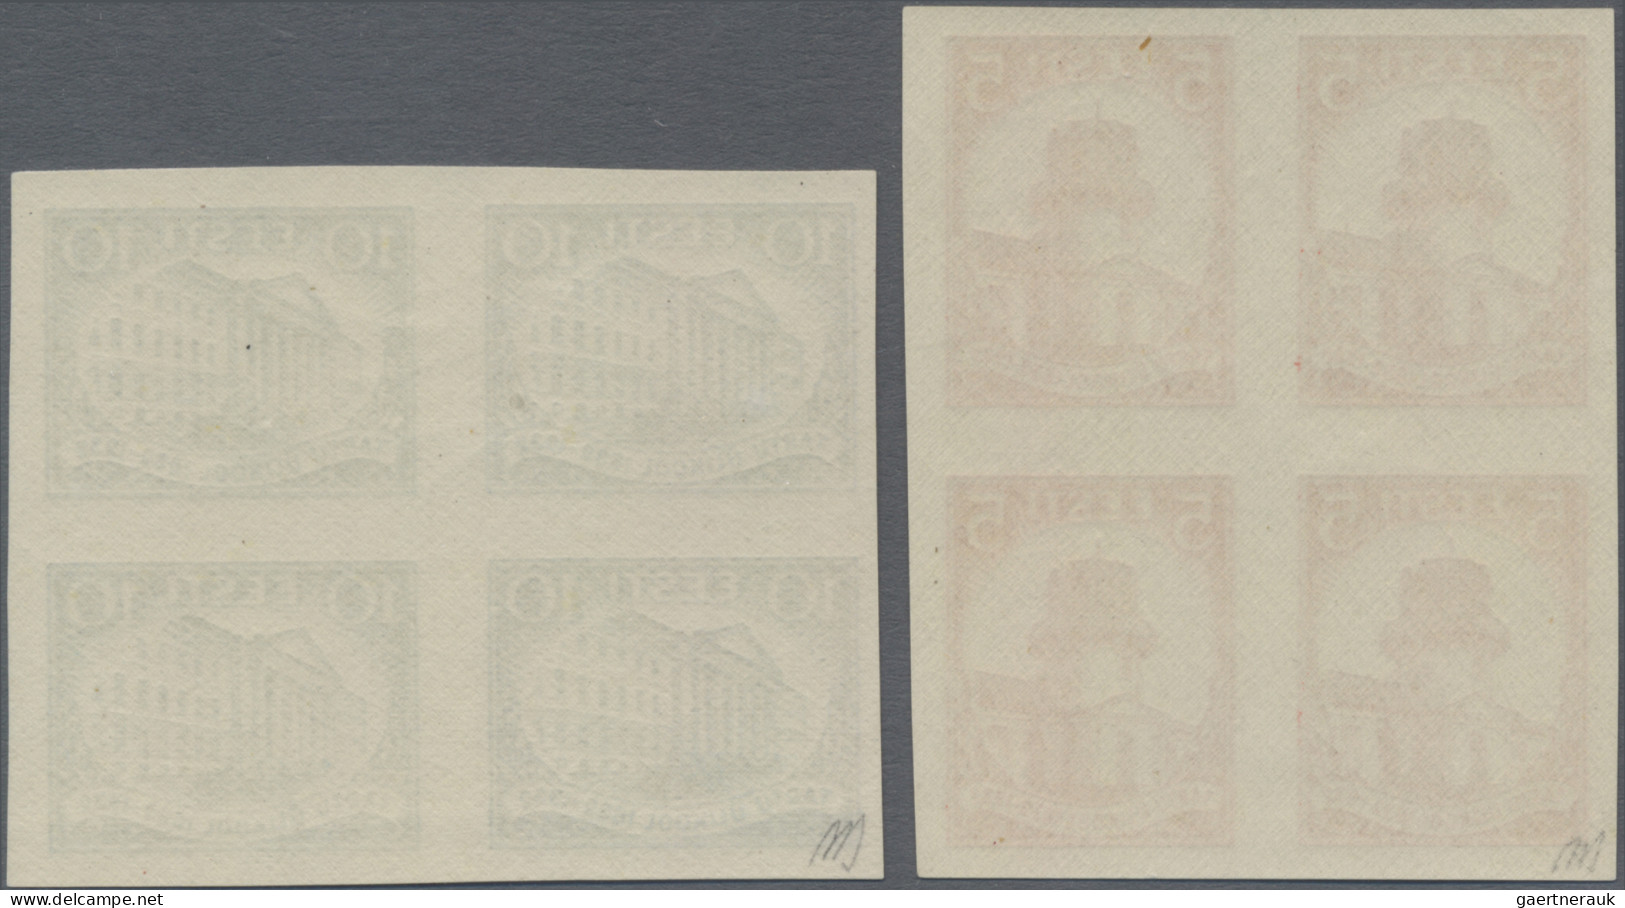 Estonia: 1928/1937, IMPERFORATE PROOFS, selection of twelve blocks of four (Mich